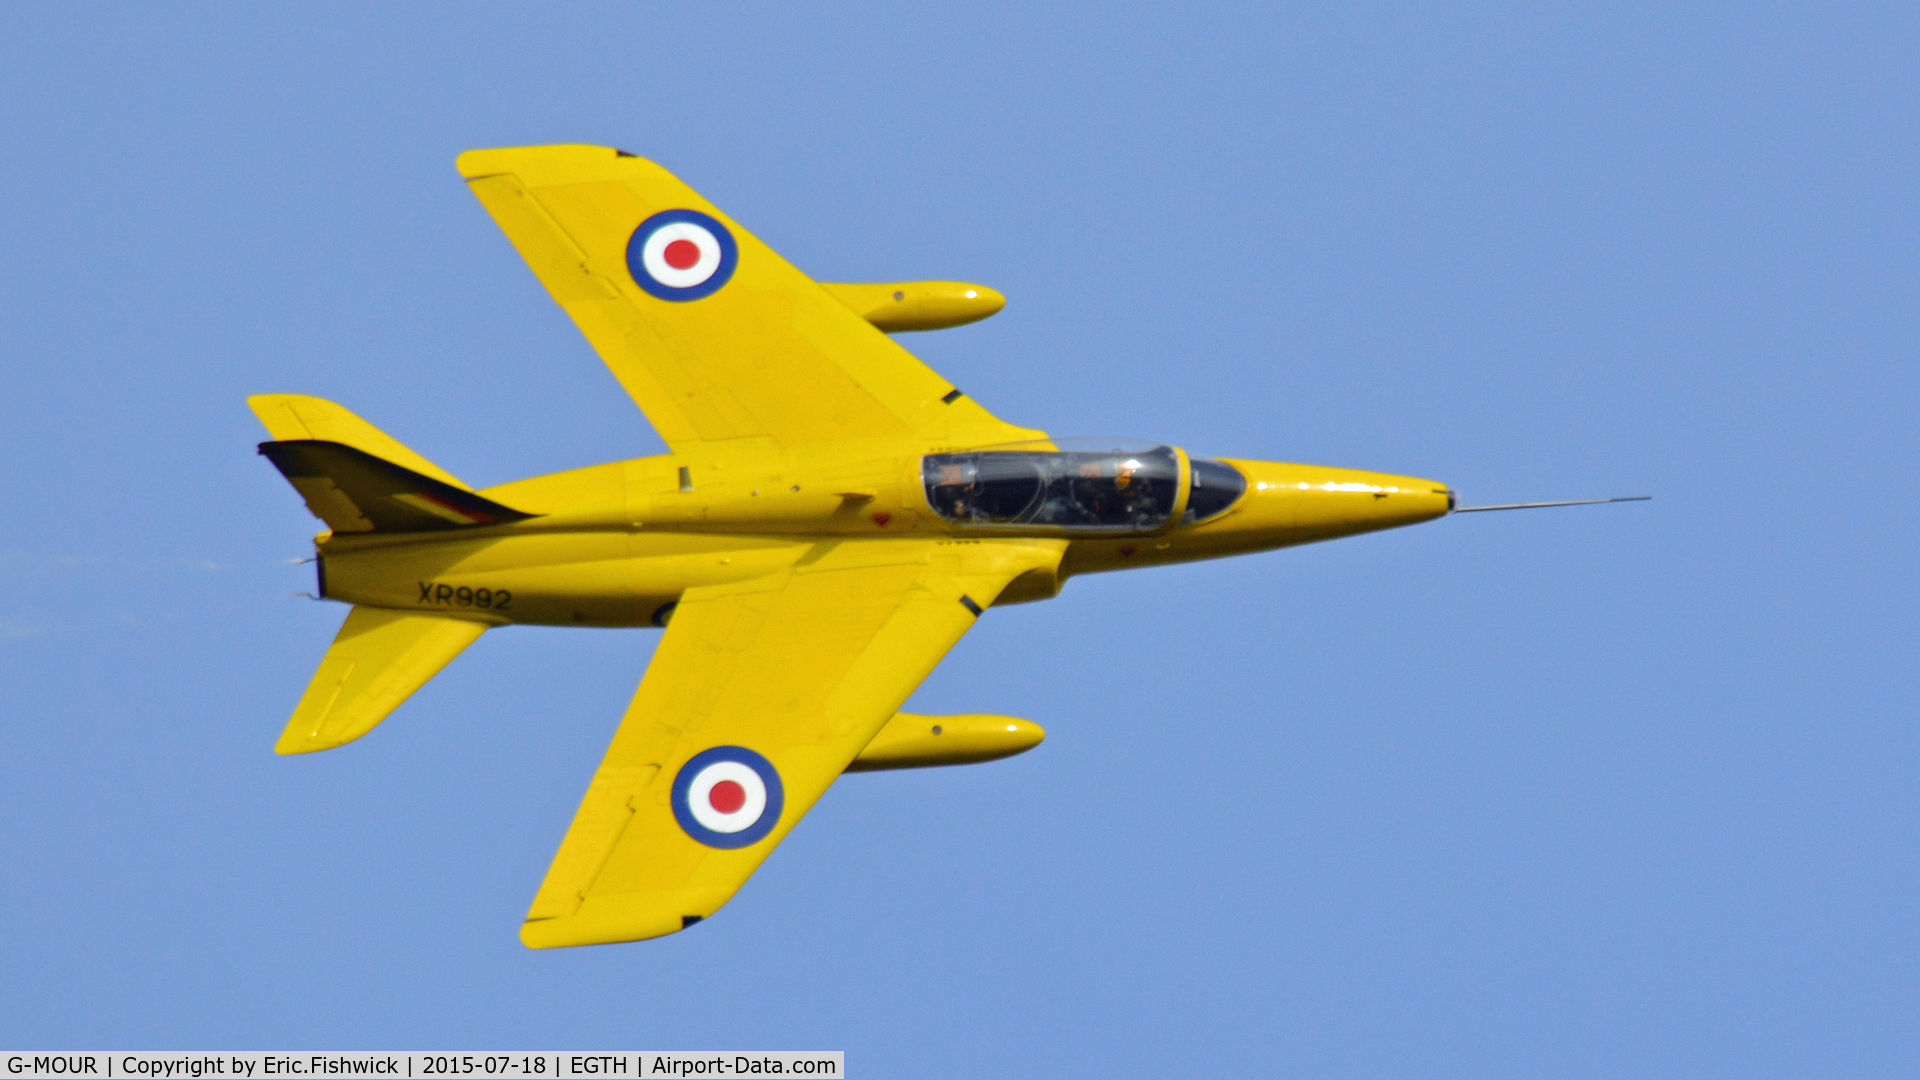 G-MOUR, 1964 Hawker Siddeley Gnat T.1 C/N FL596, 42. XR992 (in the colours of the famous Yellowjacks display team,) at Shuttleworth Best of British Airshow, July 2015 